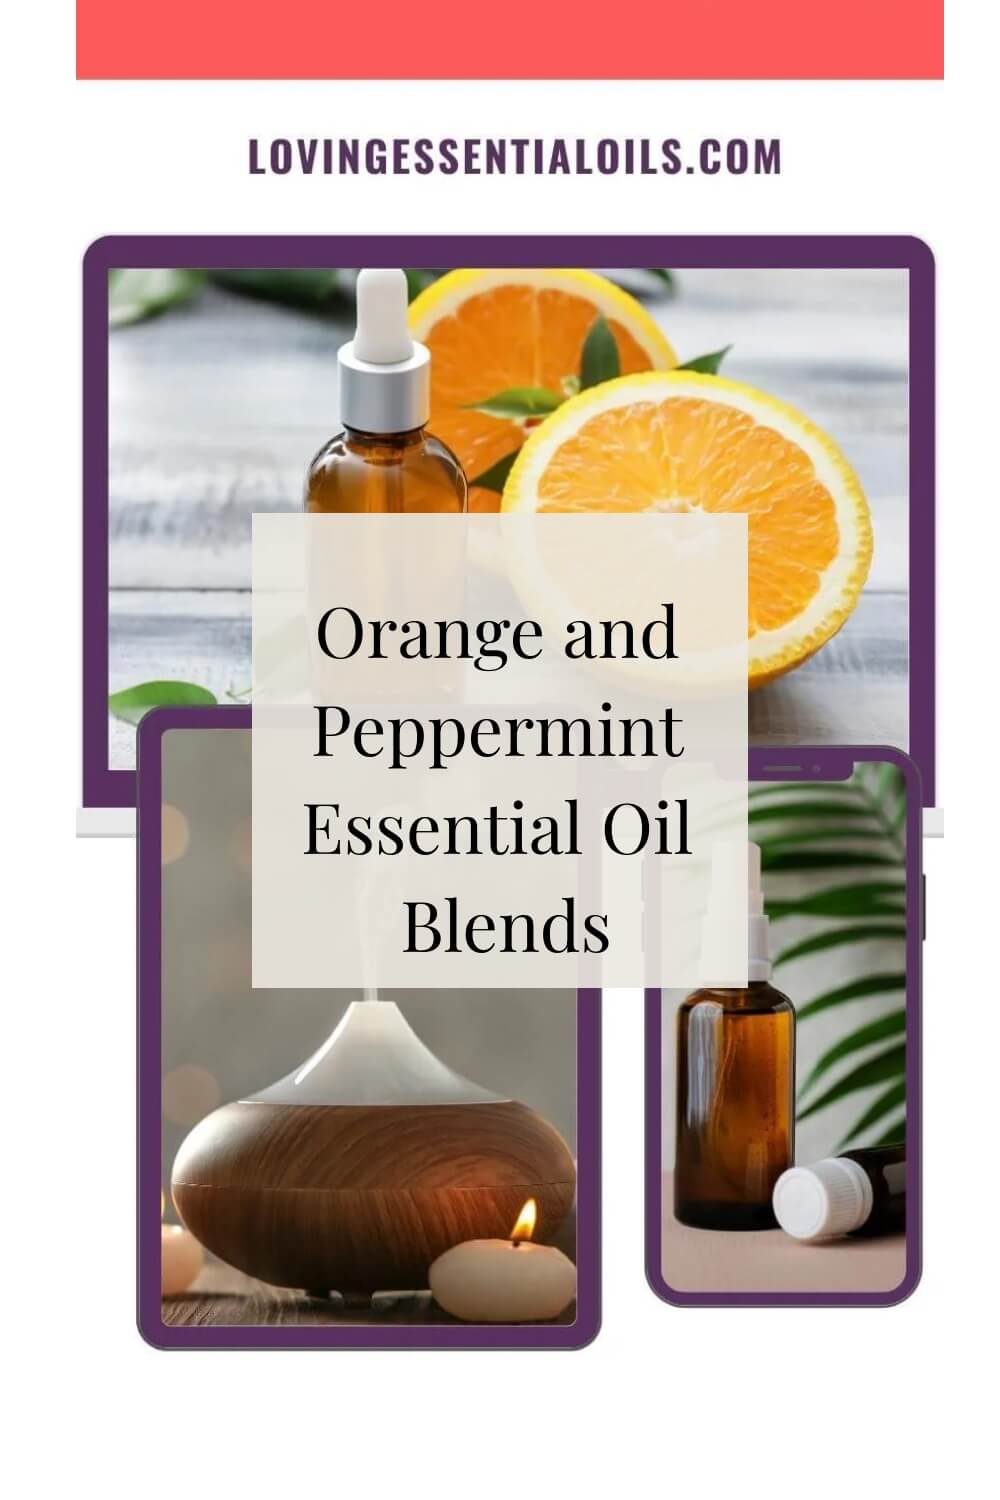 Orange and Peppermint Essential Oil Recipes by Loving Essential Oils and Jennifer Lane, Certified Aromatherapist